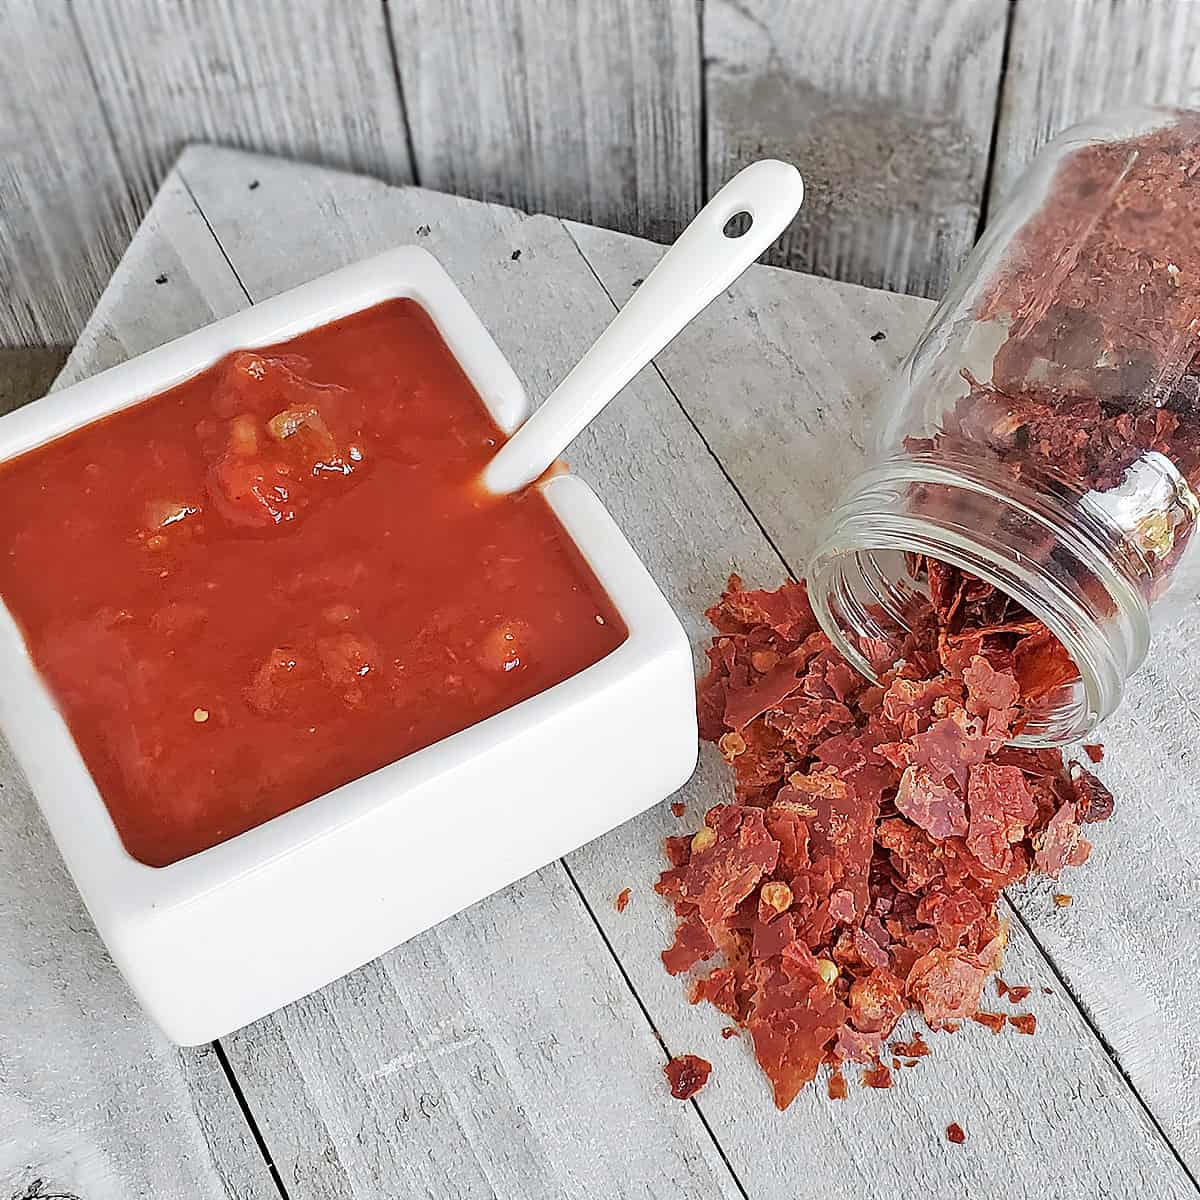 How to Dehydrate Picante Sauce or Salsa